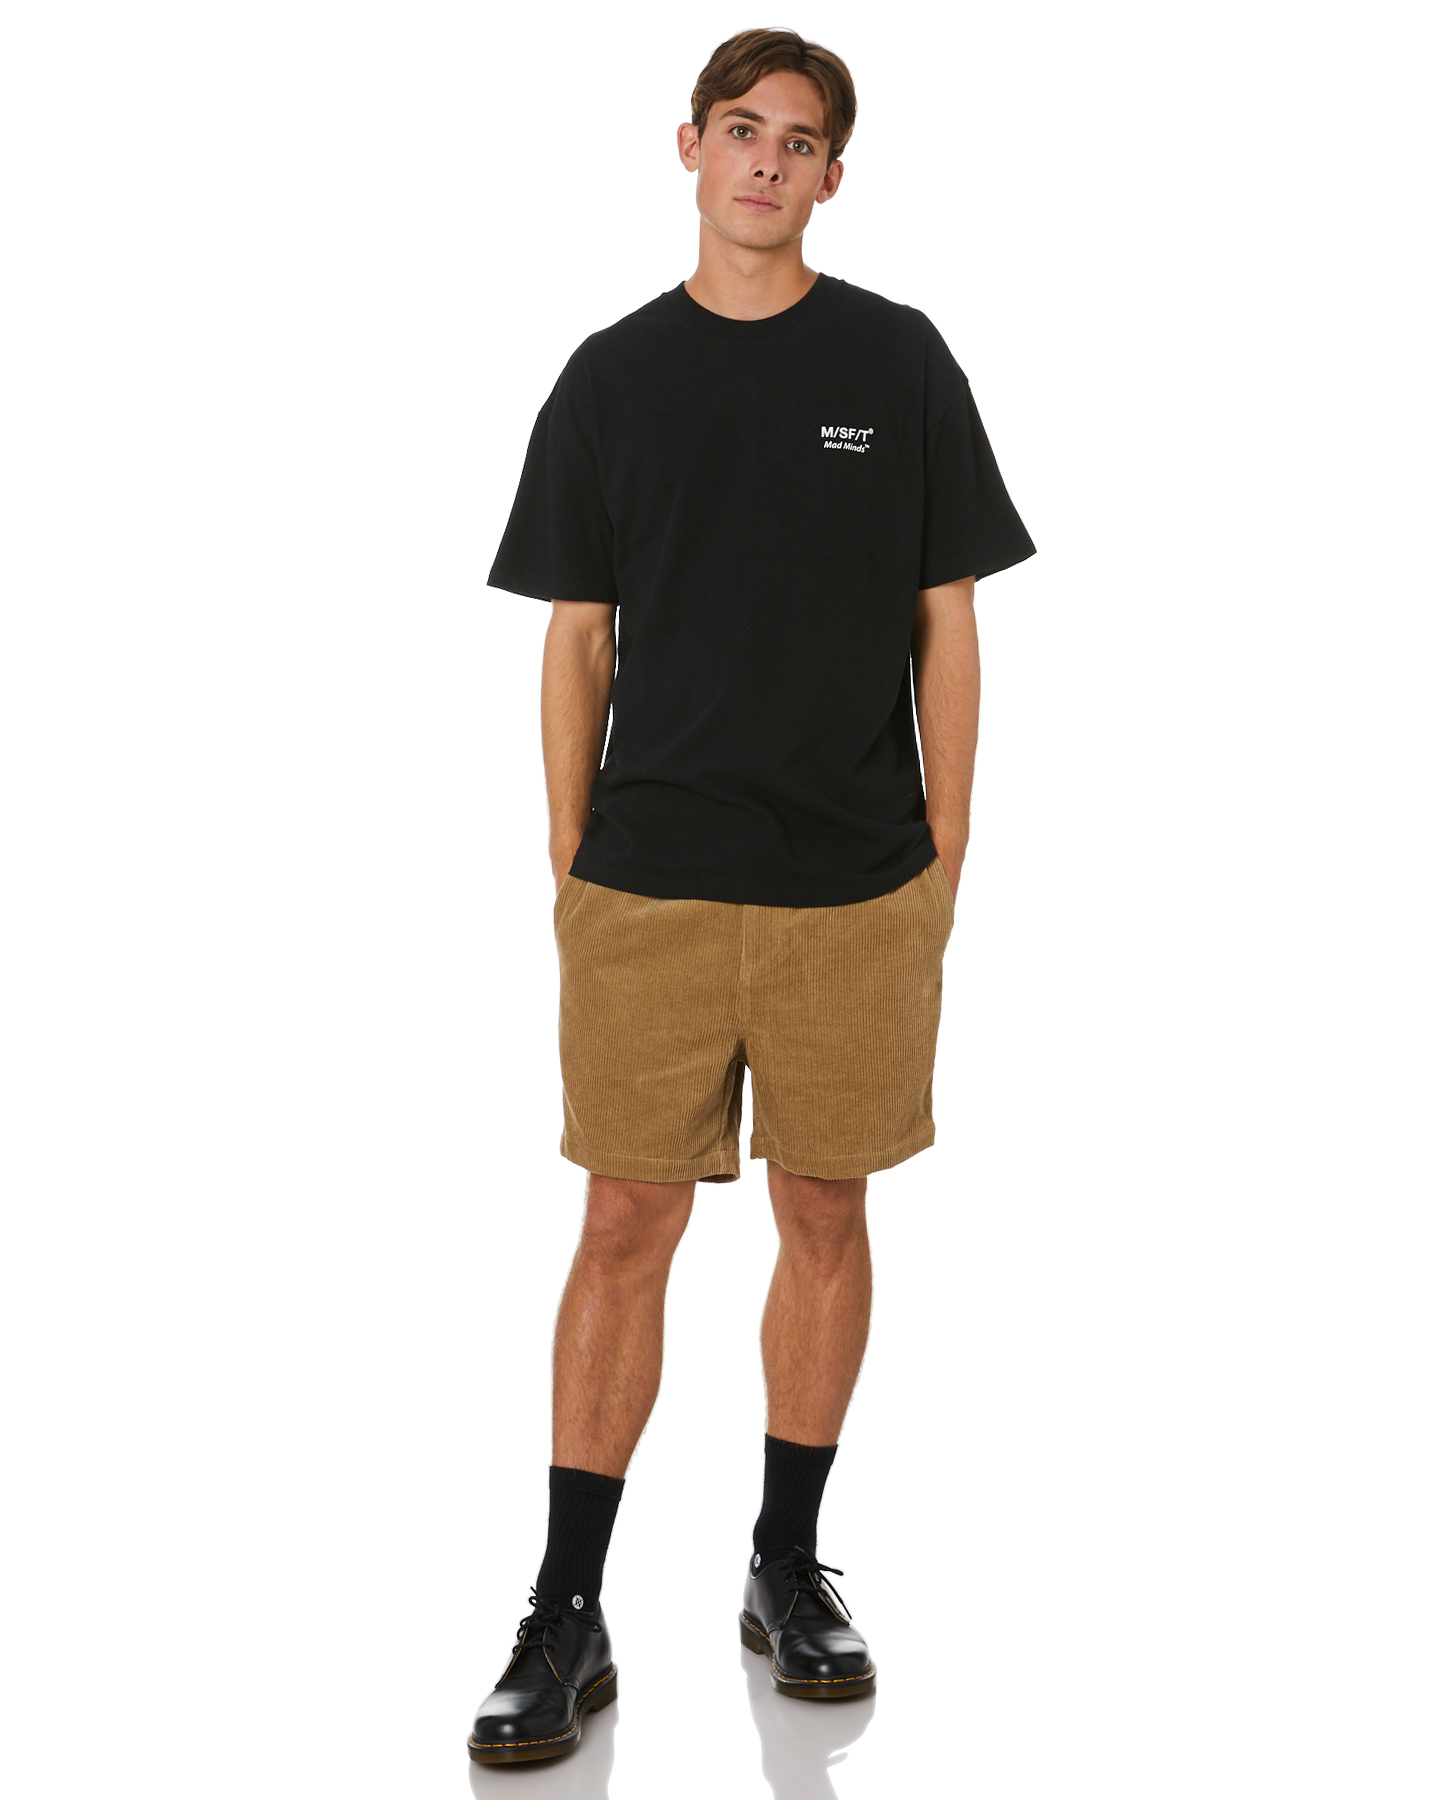 Misfit Lunchroom Ss Tee - Washed Black | SurfStitch